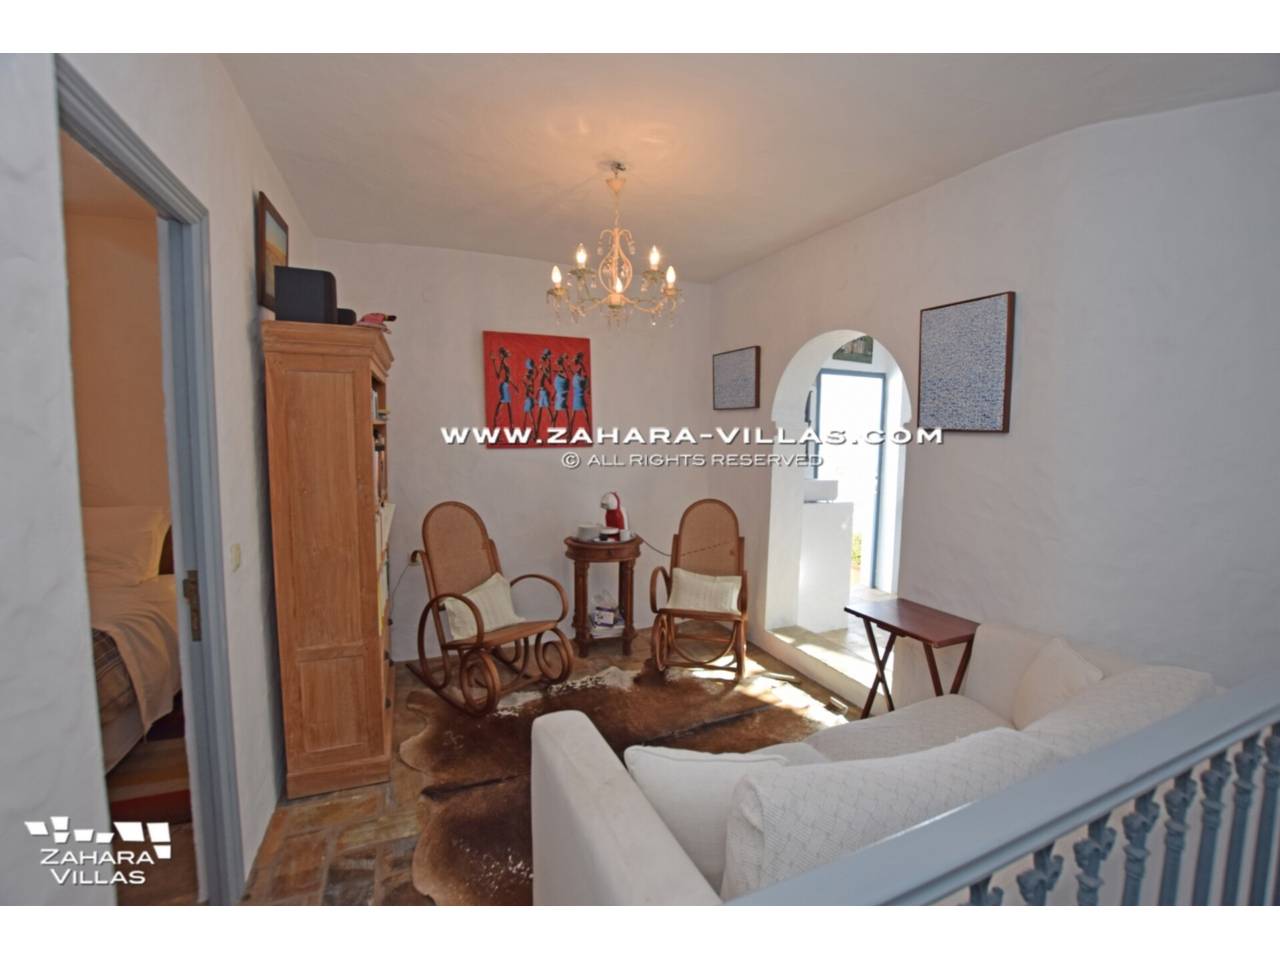 Imagen 41 de Magnificent House with central patio, in the historic center of the town